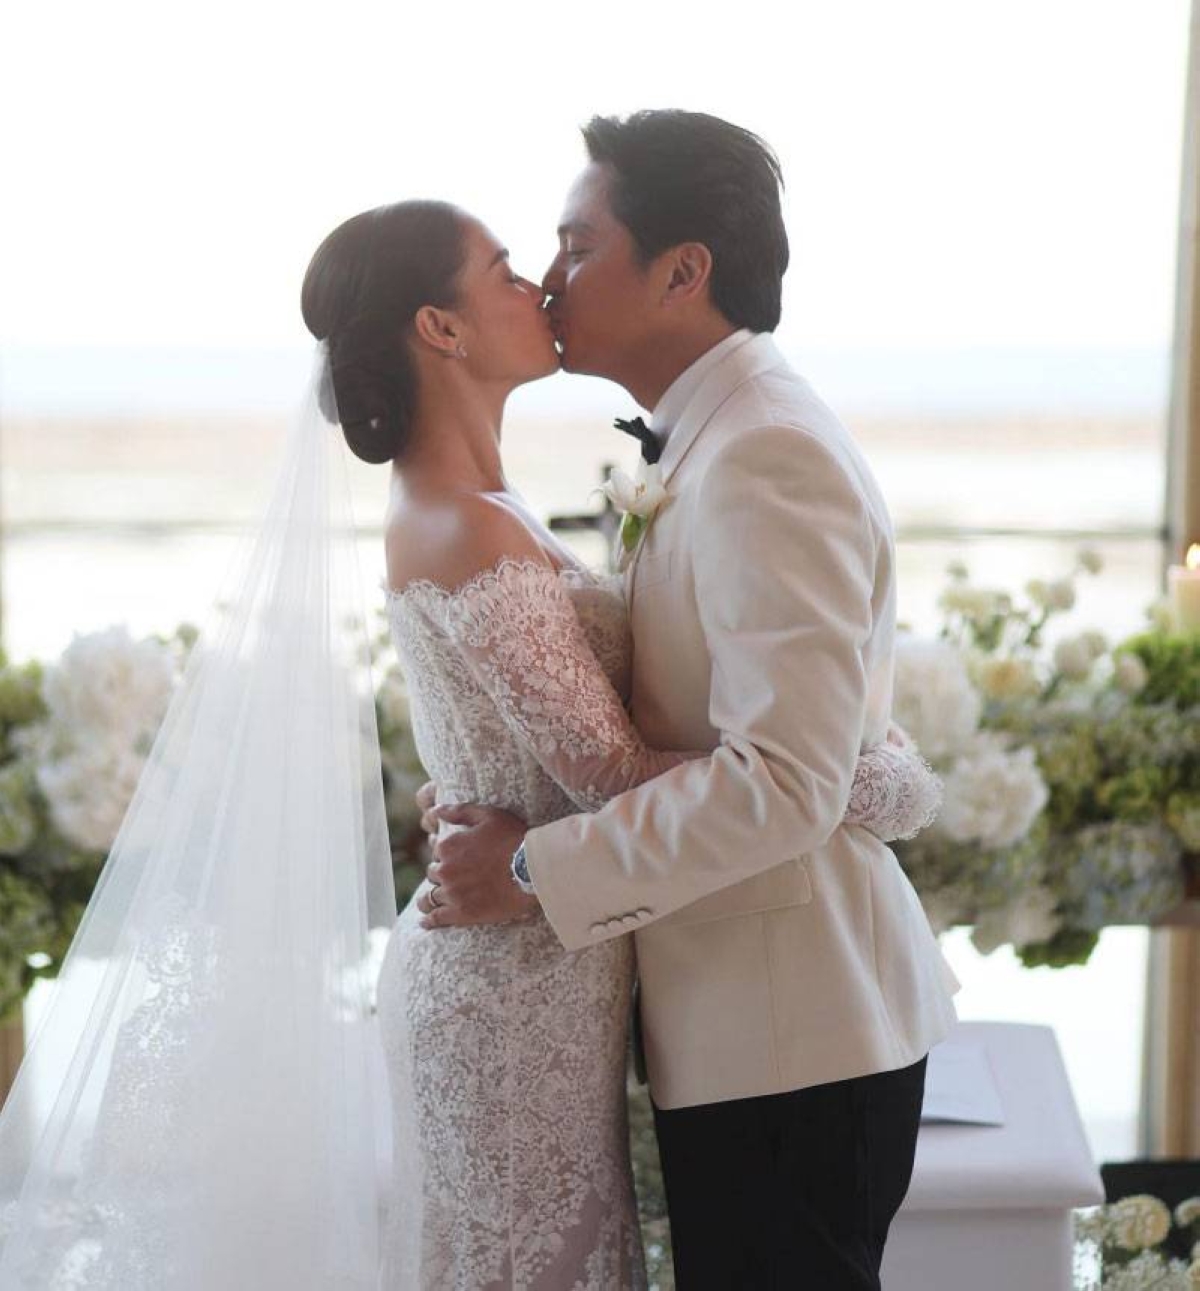 ‘And they are one.’ Maja Salvador marries Rambo Nuñez. INSTAGRAM PHOTOS/PATDY11, CHISSAI BAUTISTA